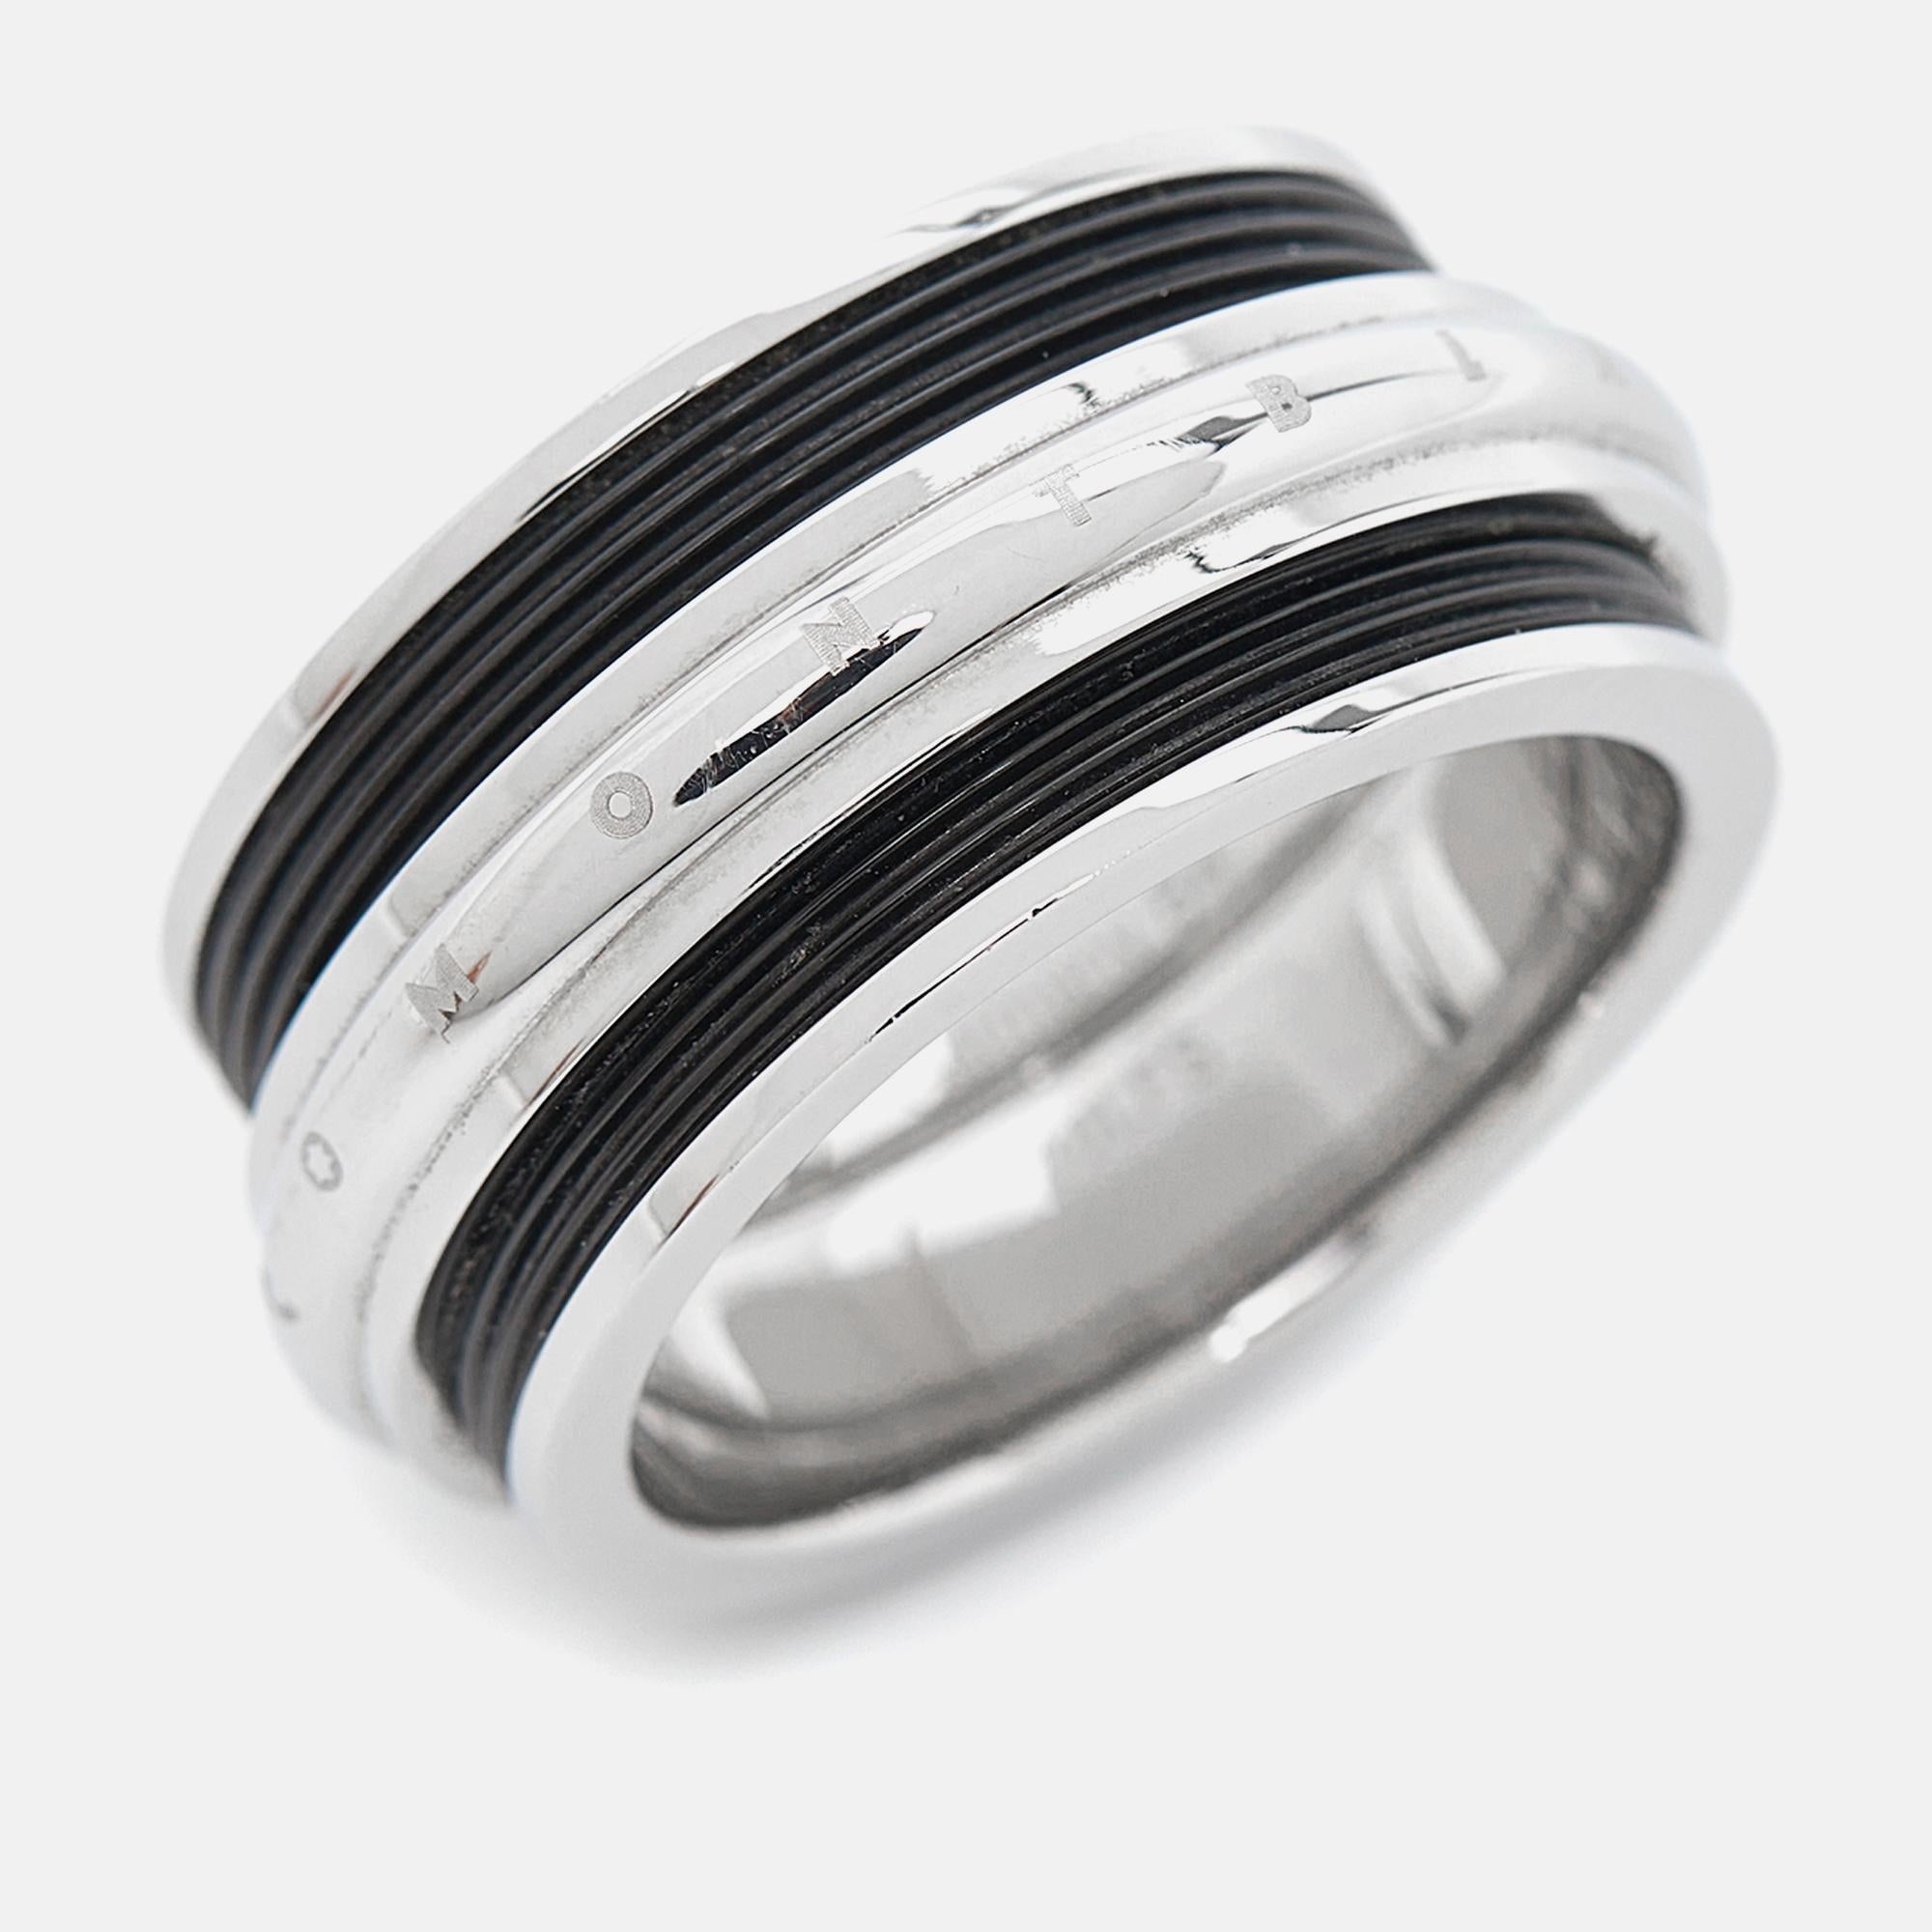 Well-crafted accessories are a sign of creativity and style. From their Men's Contemporary Collection, this Montblanc Sliding Ring is designed to last. Crafted from silver-tone metal and black PVD steel, this piece has a blend of black and silver,